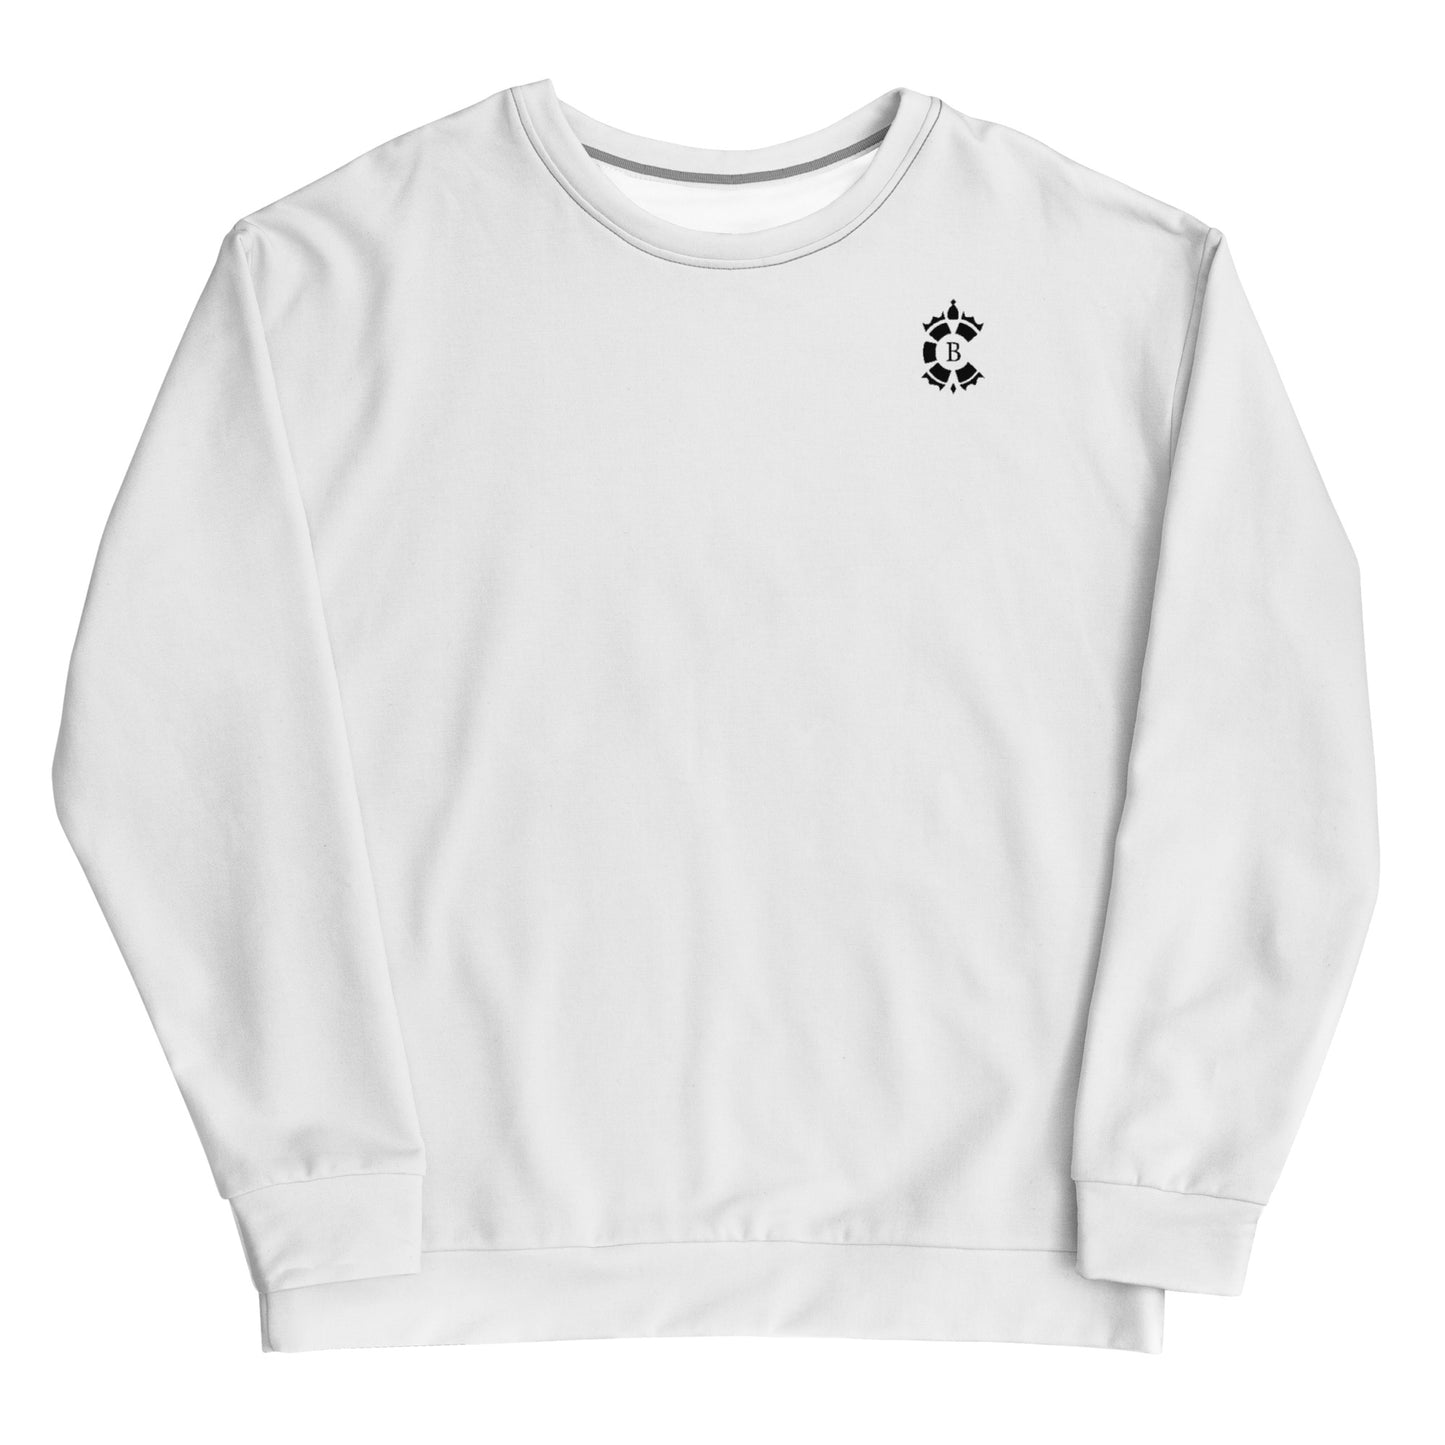 CONTRABRANDED Logo Sweater Black on White